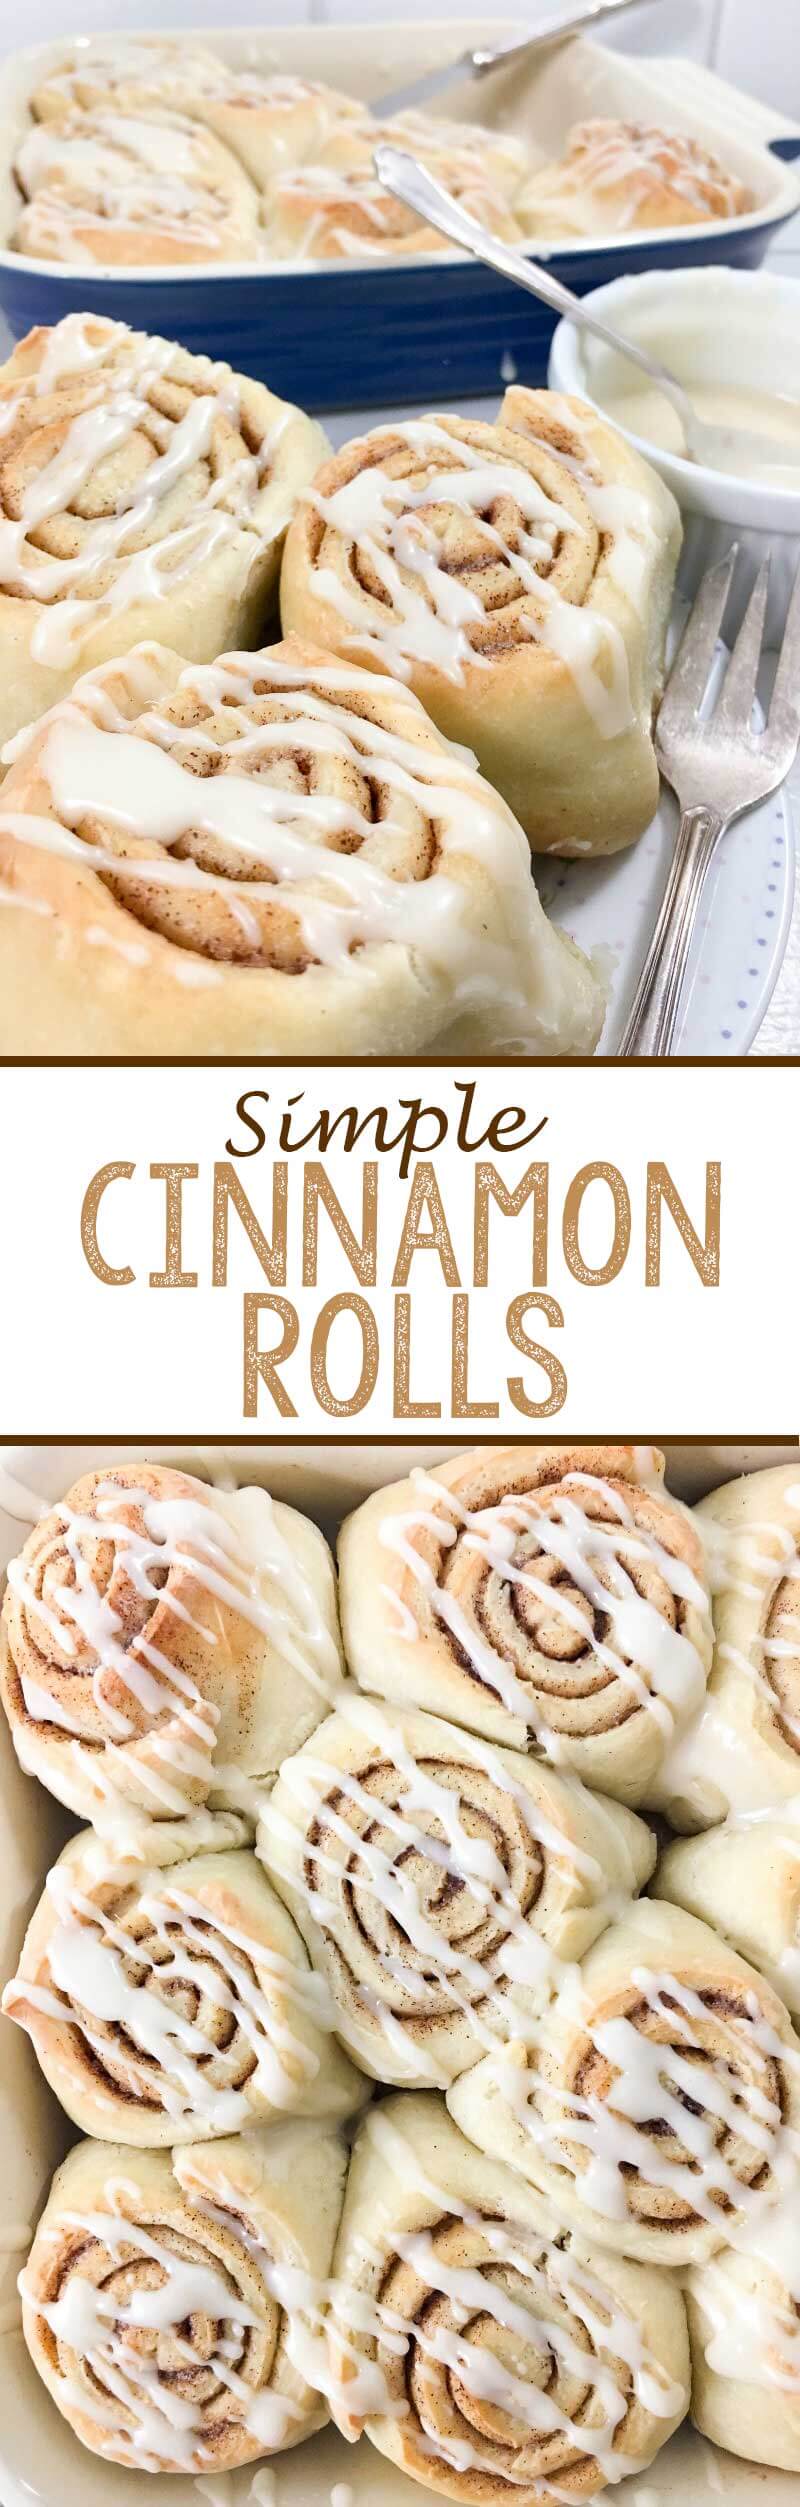 Simple Cinnamon Roll recipe with only a few ingredients!